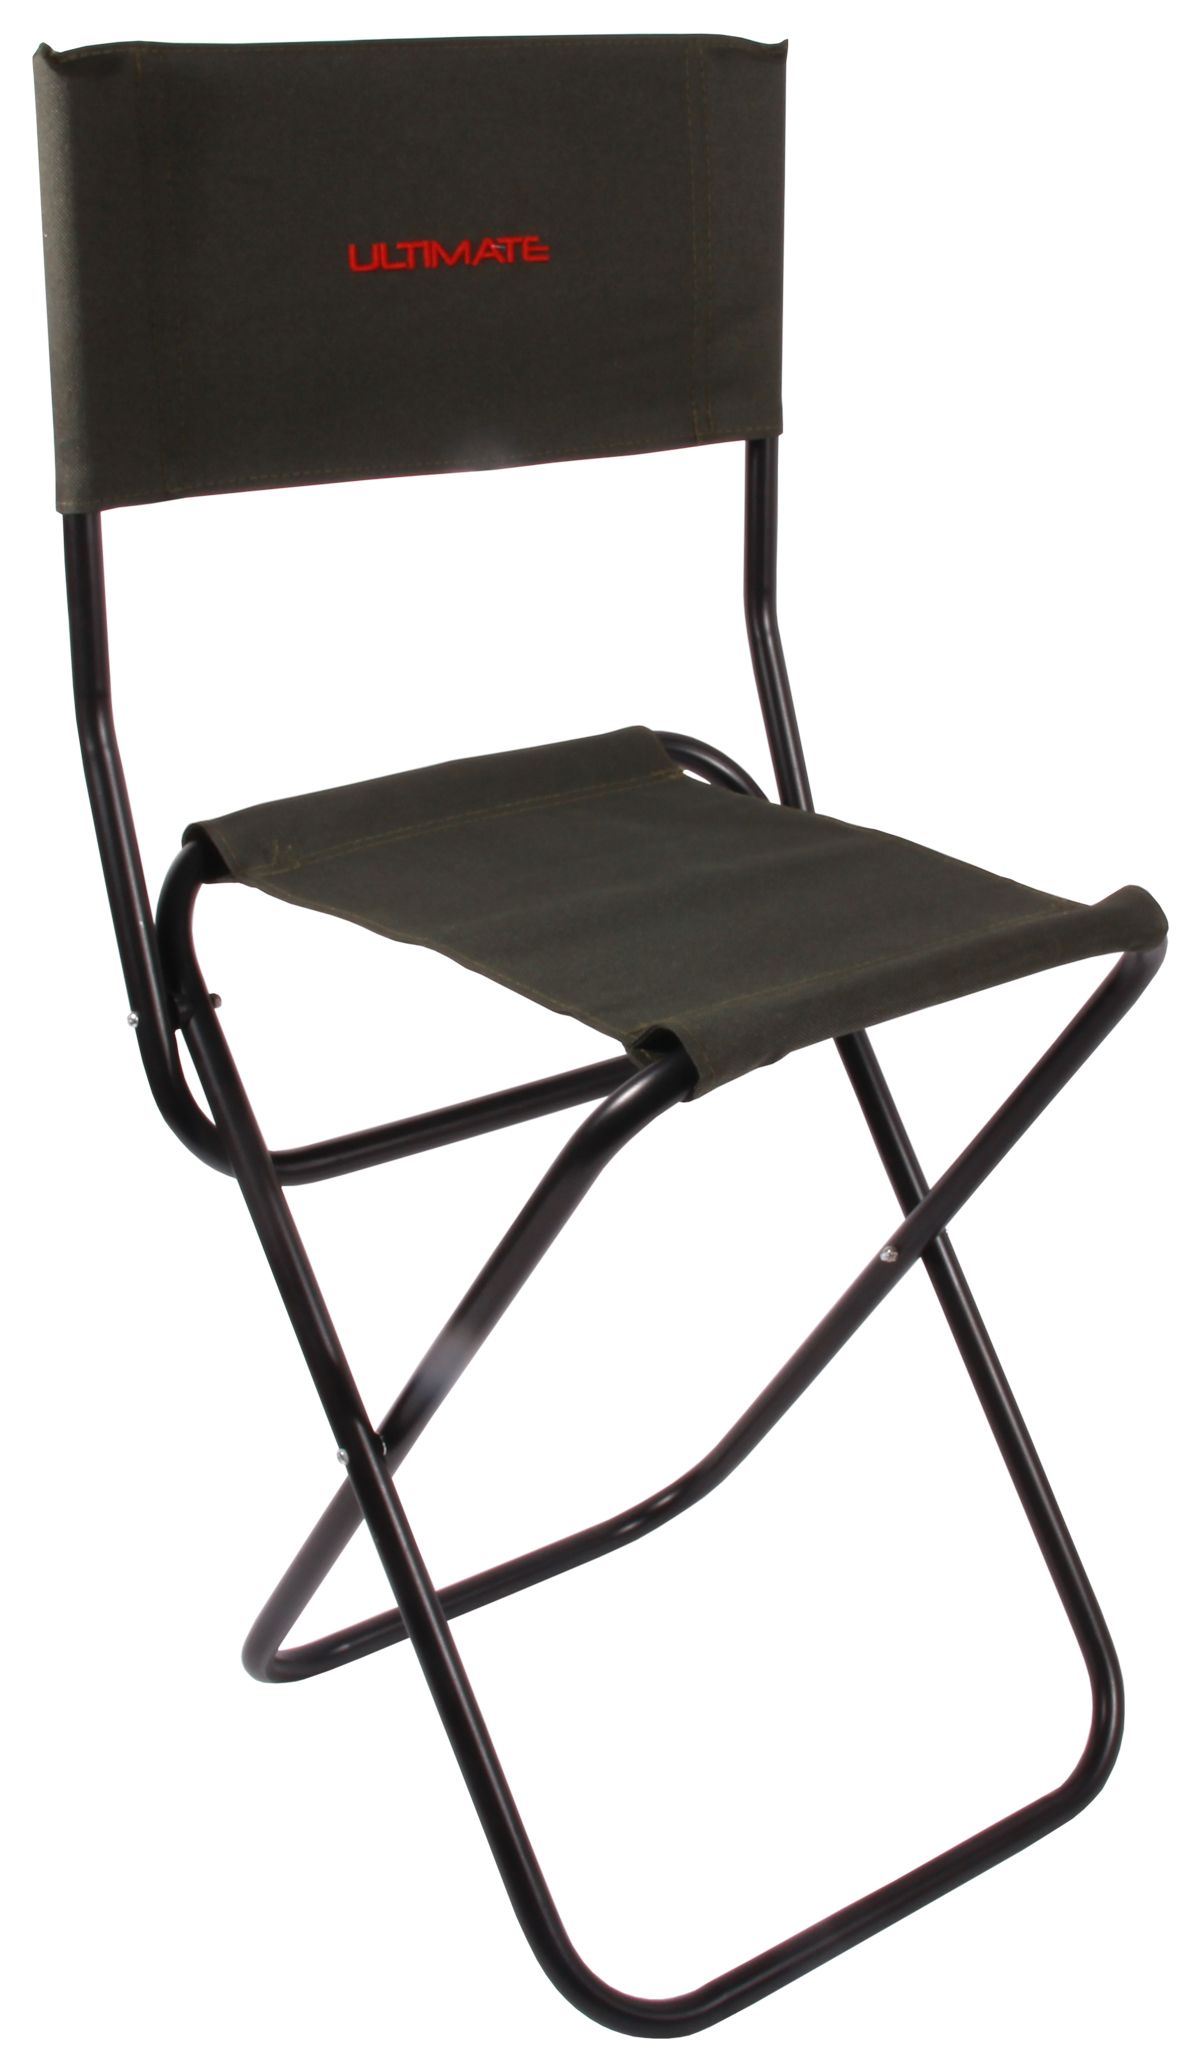 Ultimate Folding Seat with Backrest